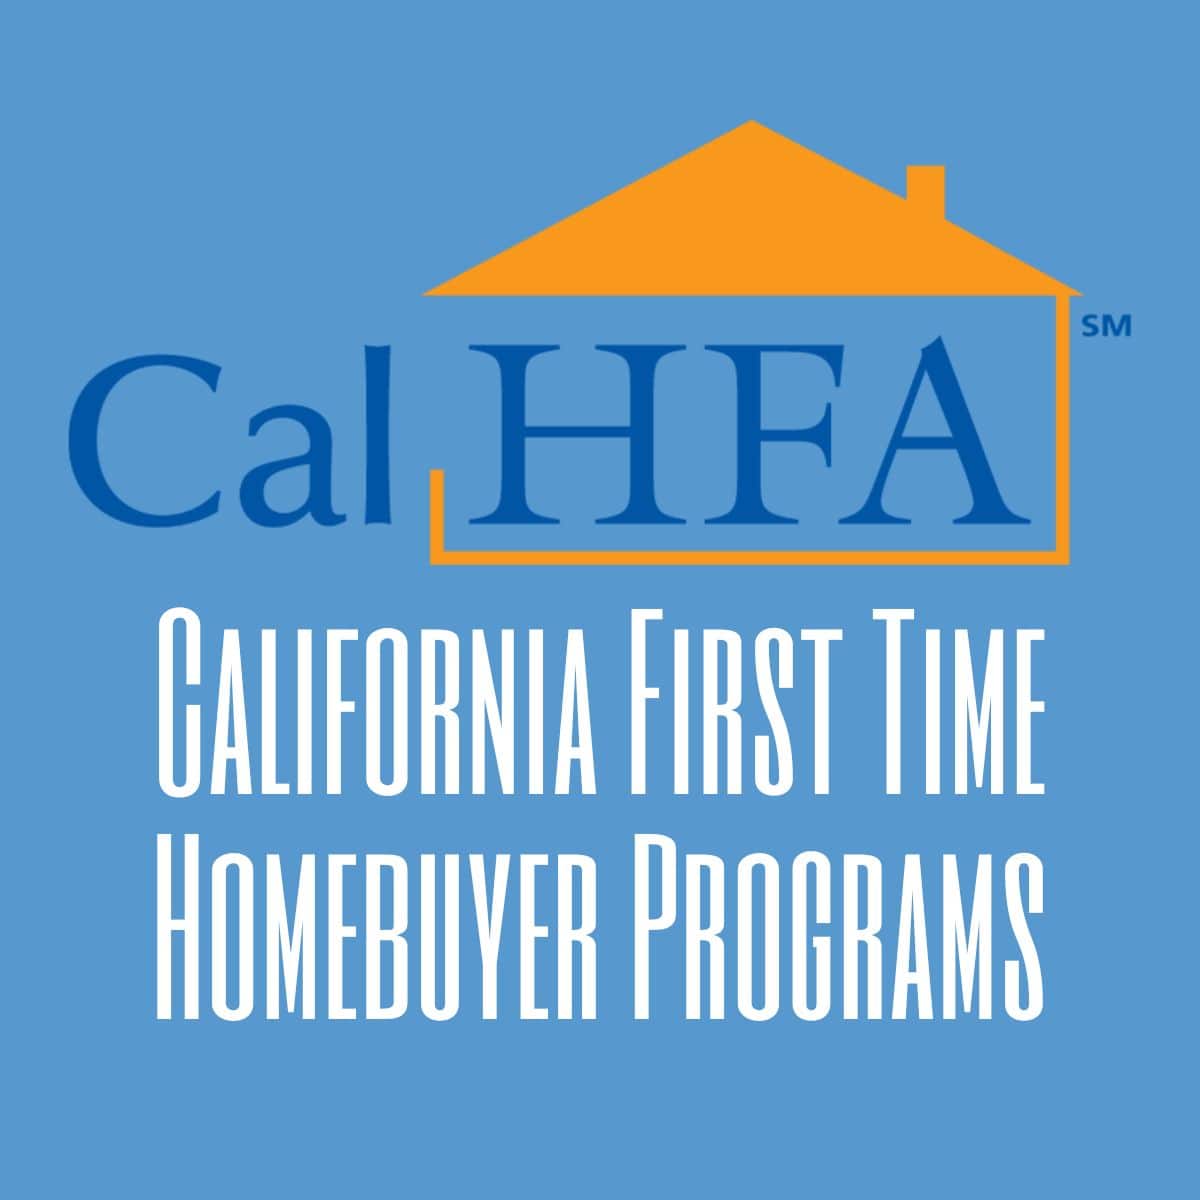 California First Time Homebuyer Programs